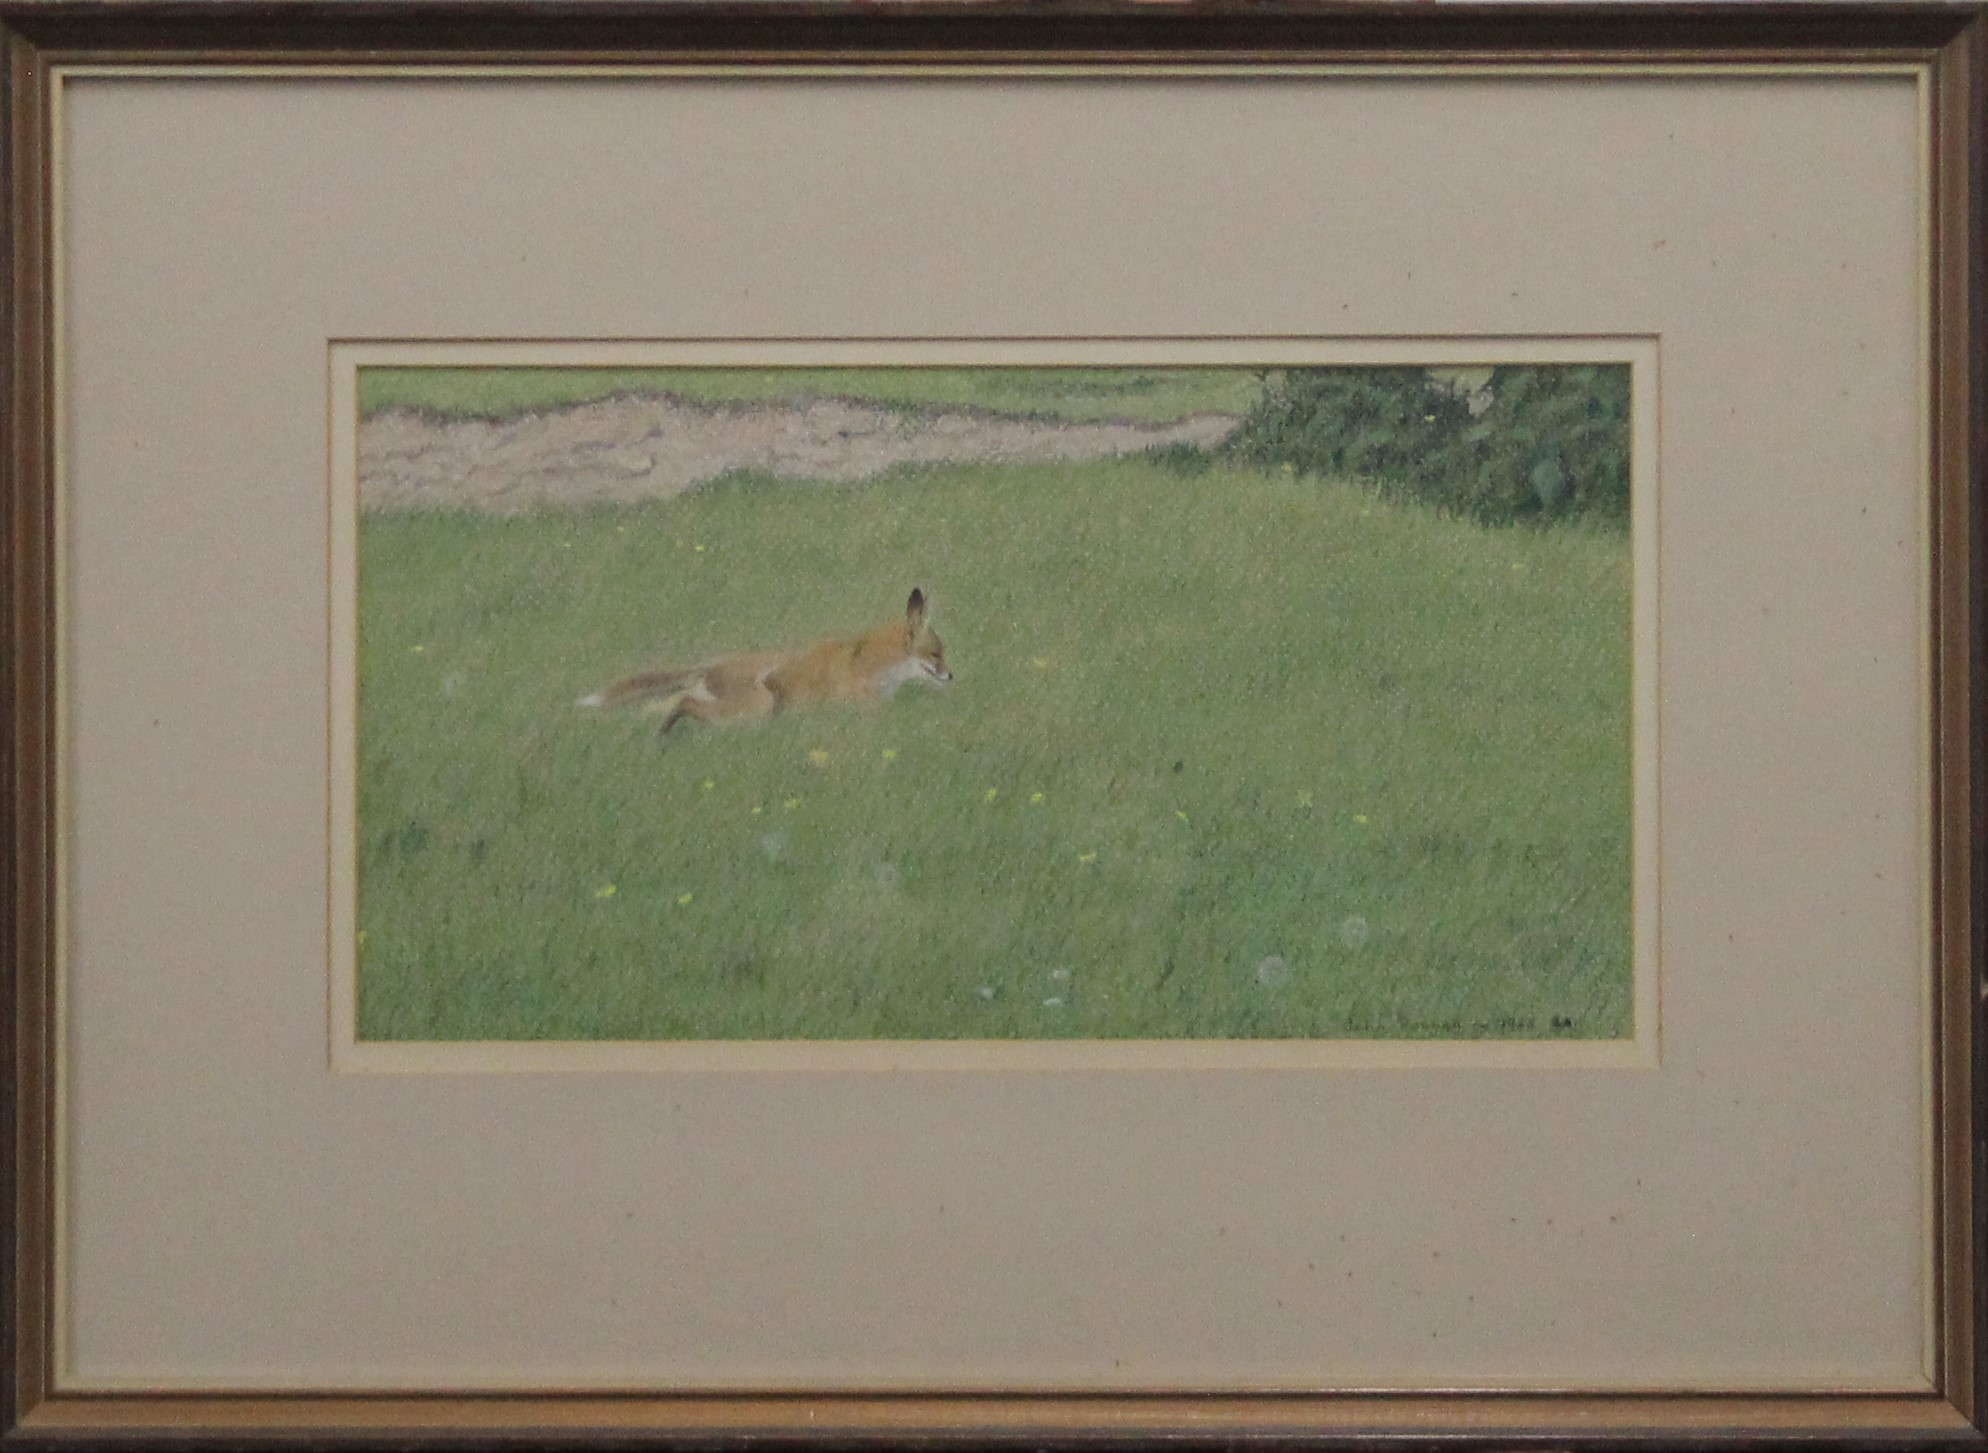 REANEY, JOHN SWLA (1987-2019) British (AR), Fox, Pastel, signed and dated 1988, framed and glazed. - Image 2 of 3